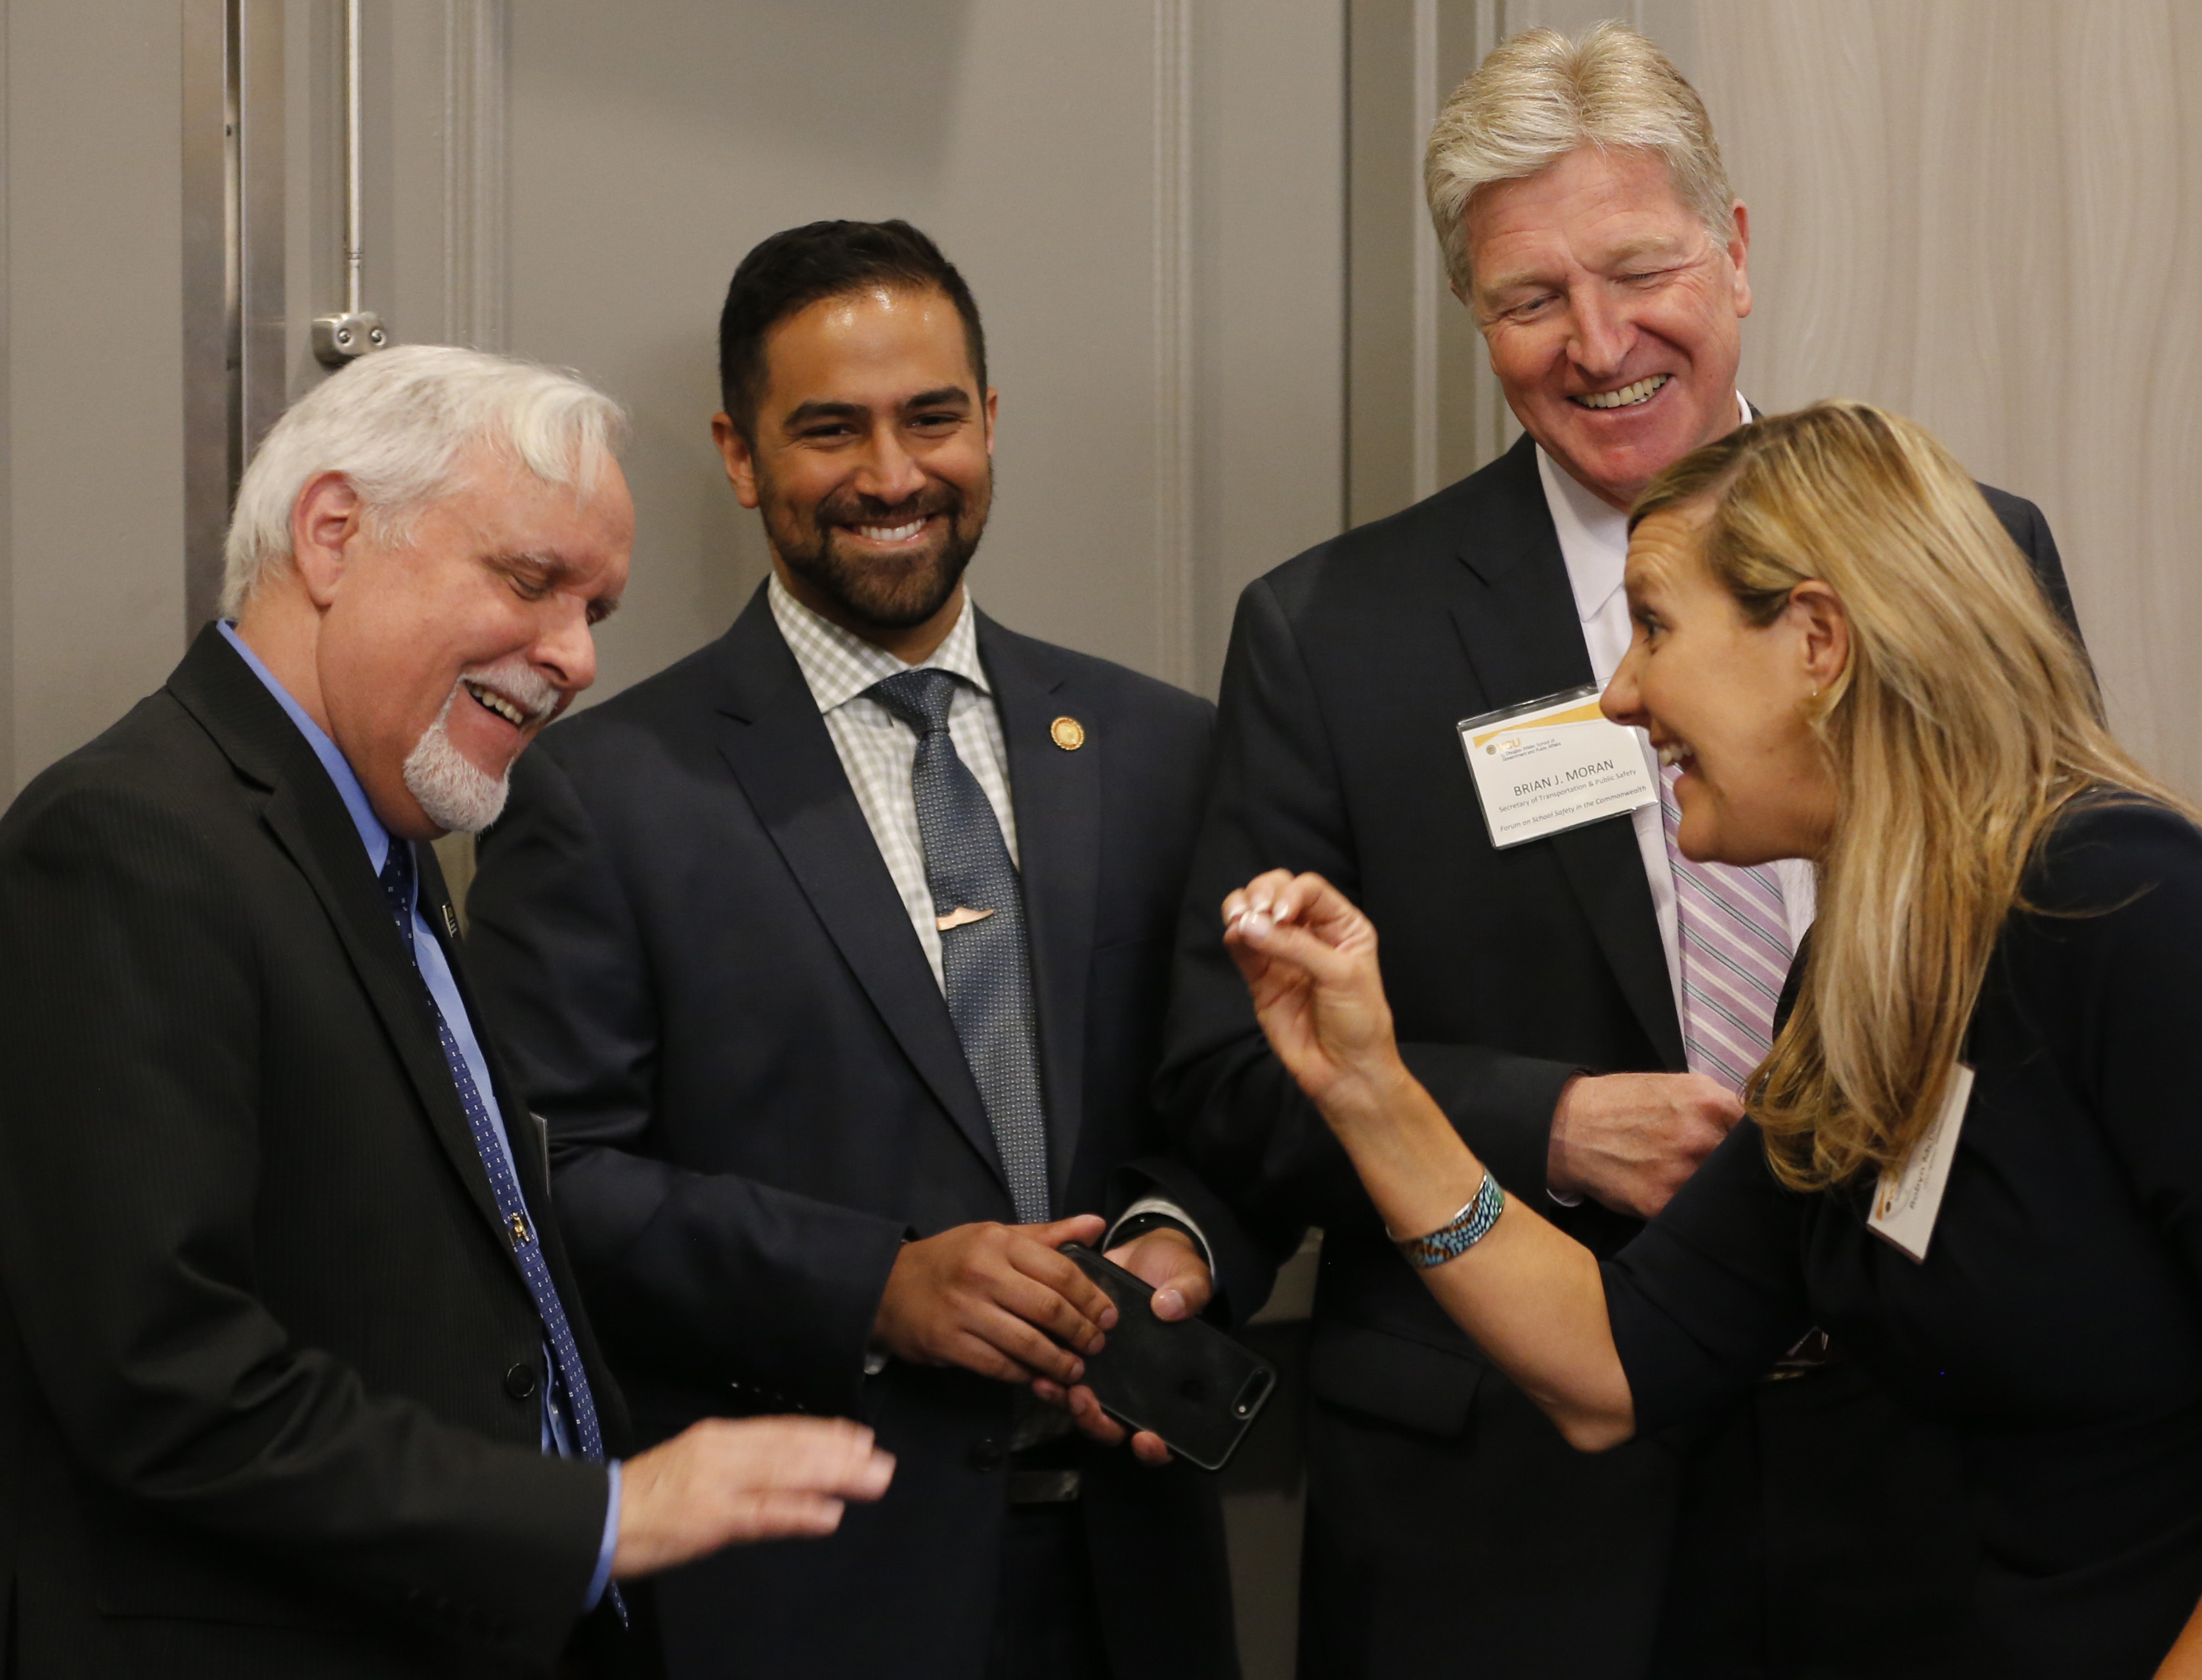  Dr. Robyn McDougle (right) with Secretary Brian Moran, Asif Bhavnagri of the Secretary’s Office, and James Keck, Wilder School assistant professor, at the Forum on School Safety in the Commonwealth.